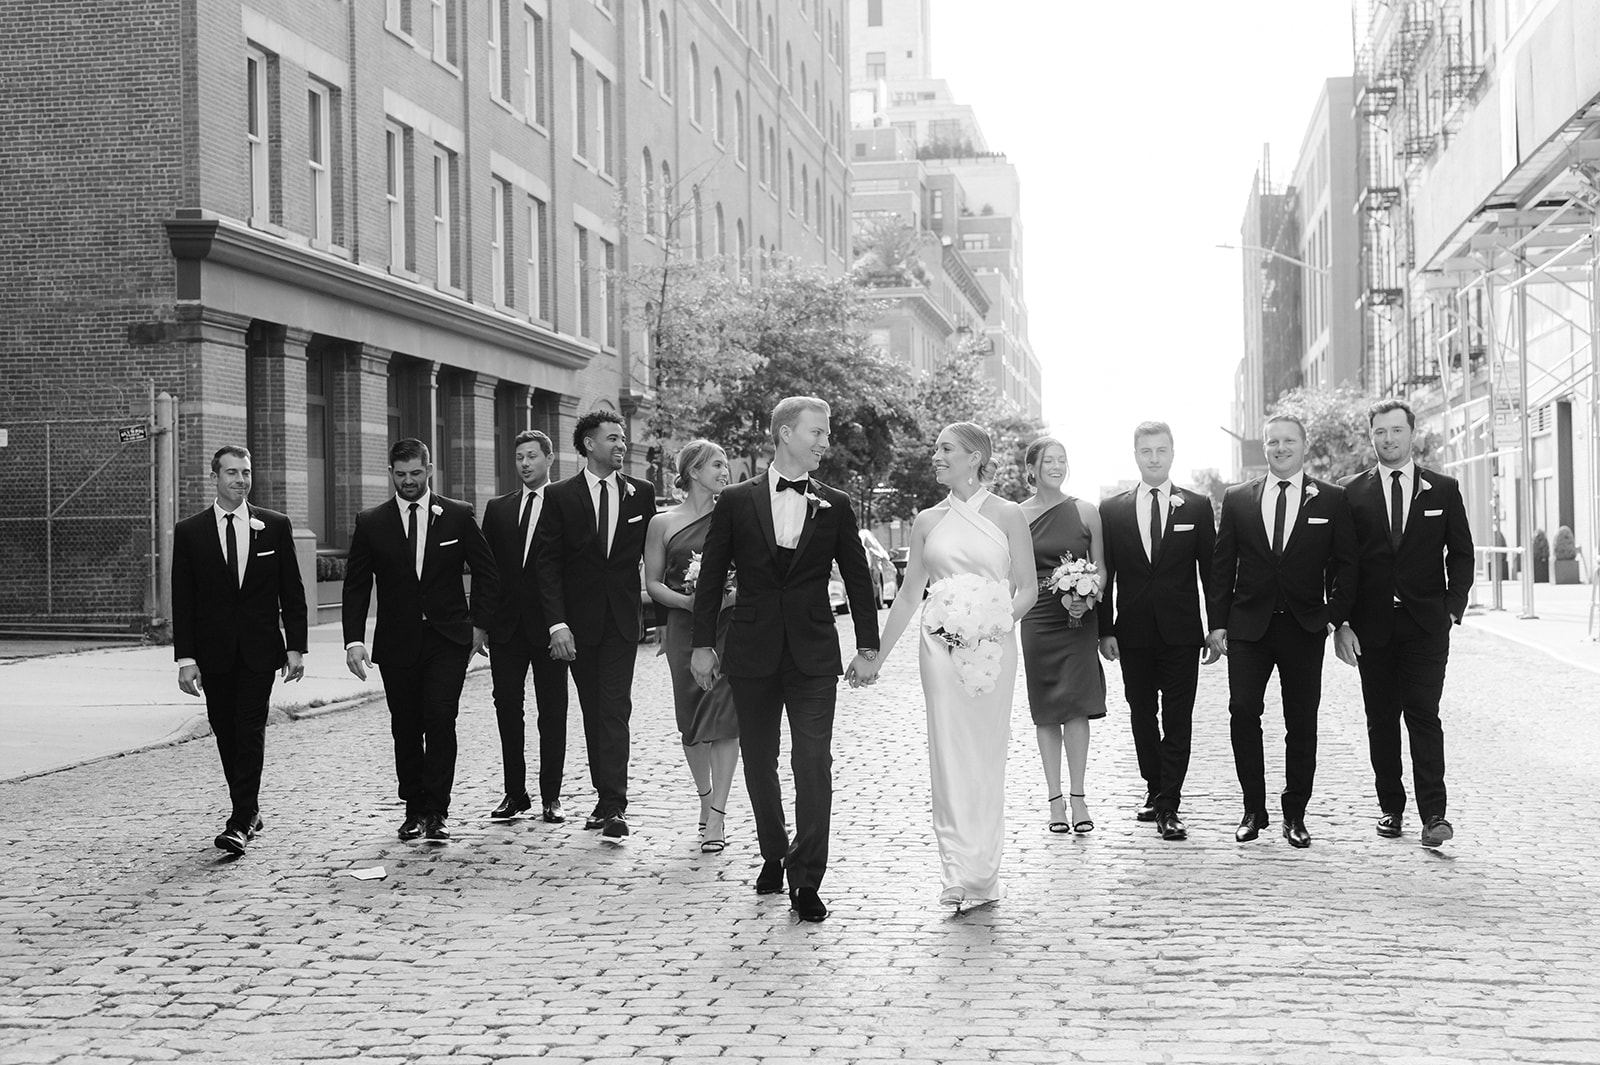 West Village bride, groom, and wedding party walk together in a candid New York wedding portrait.